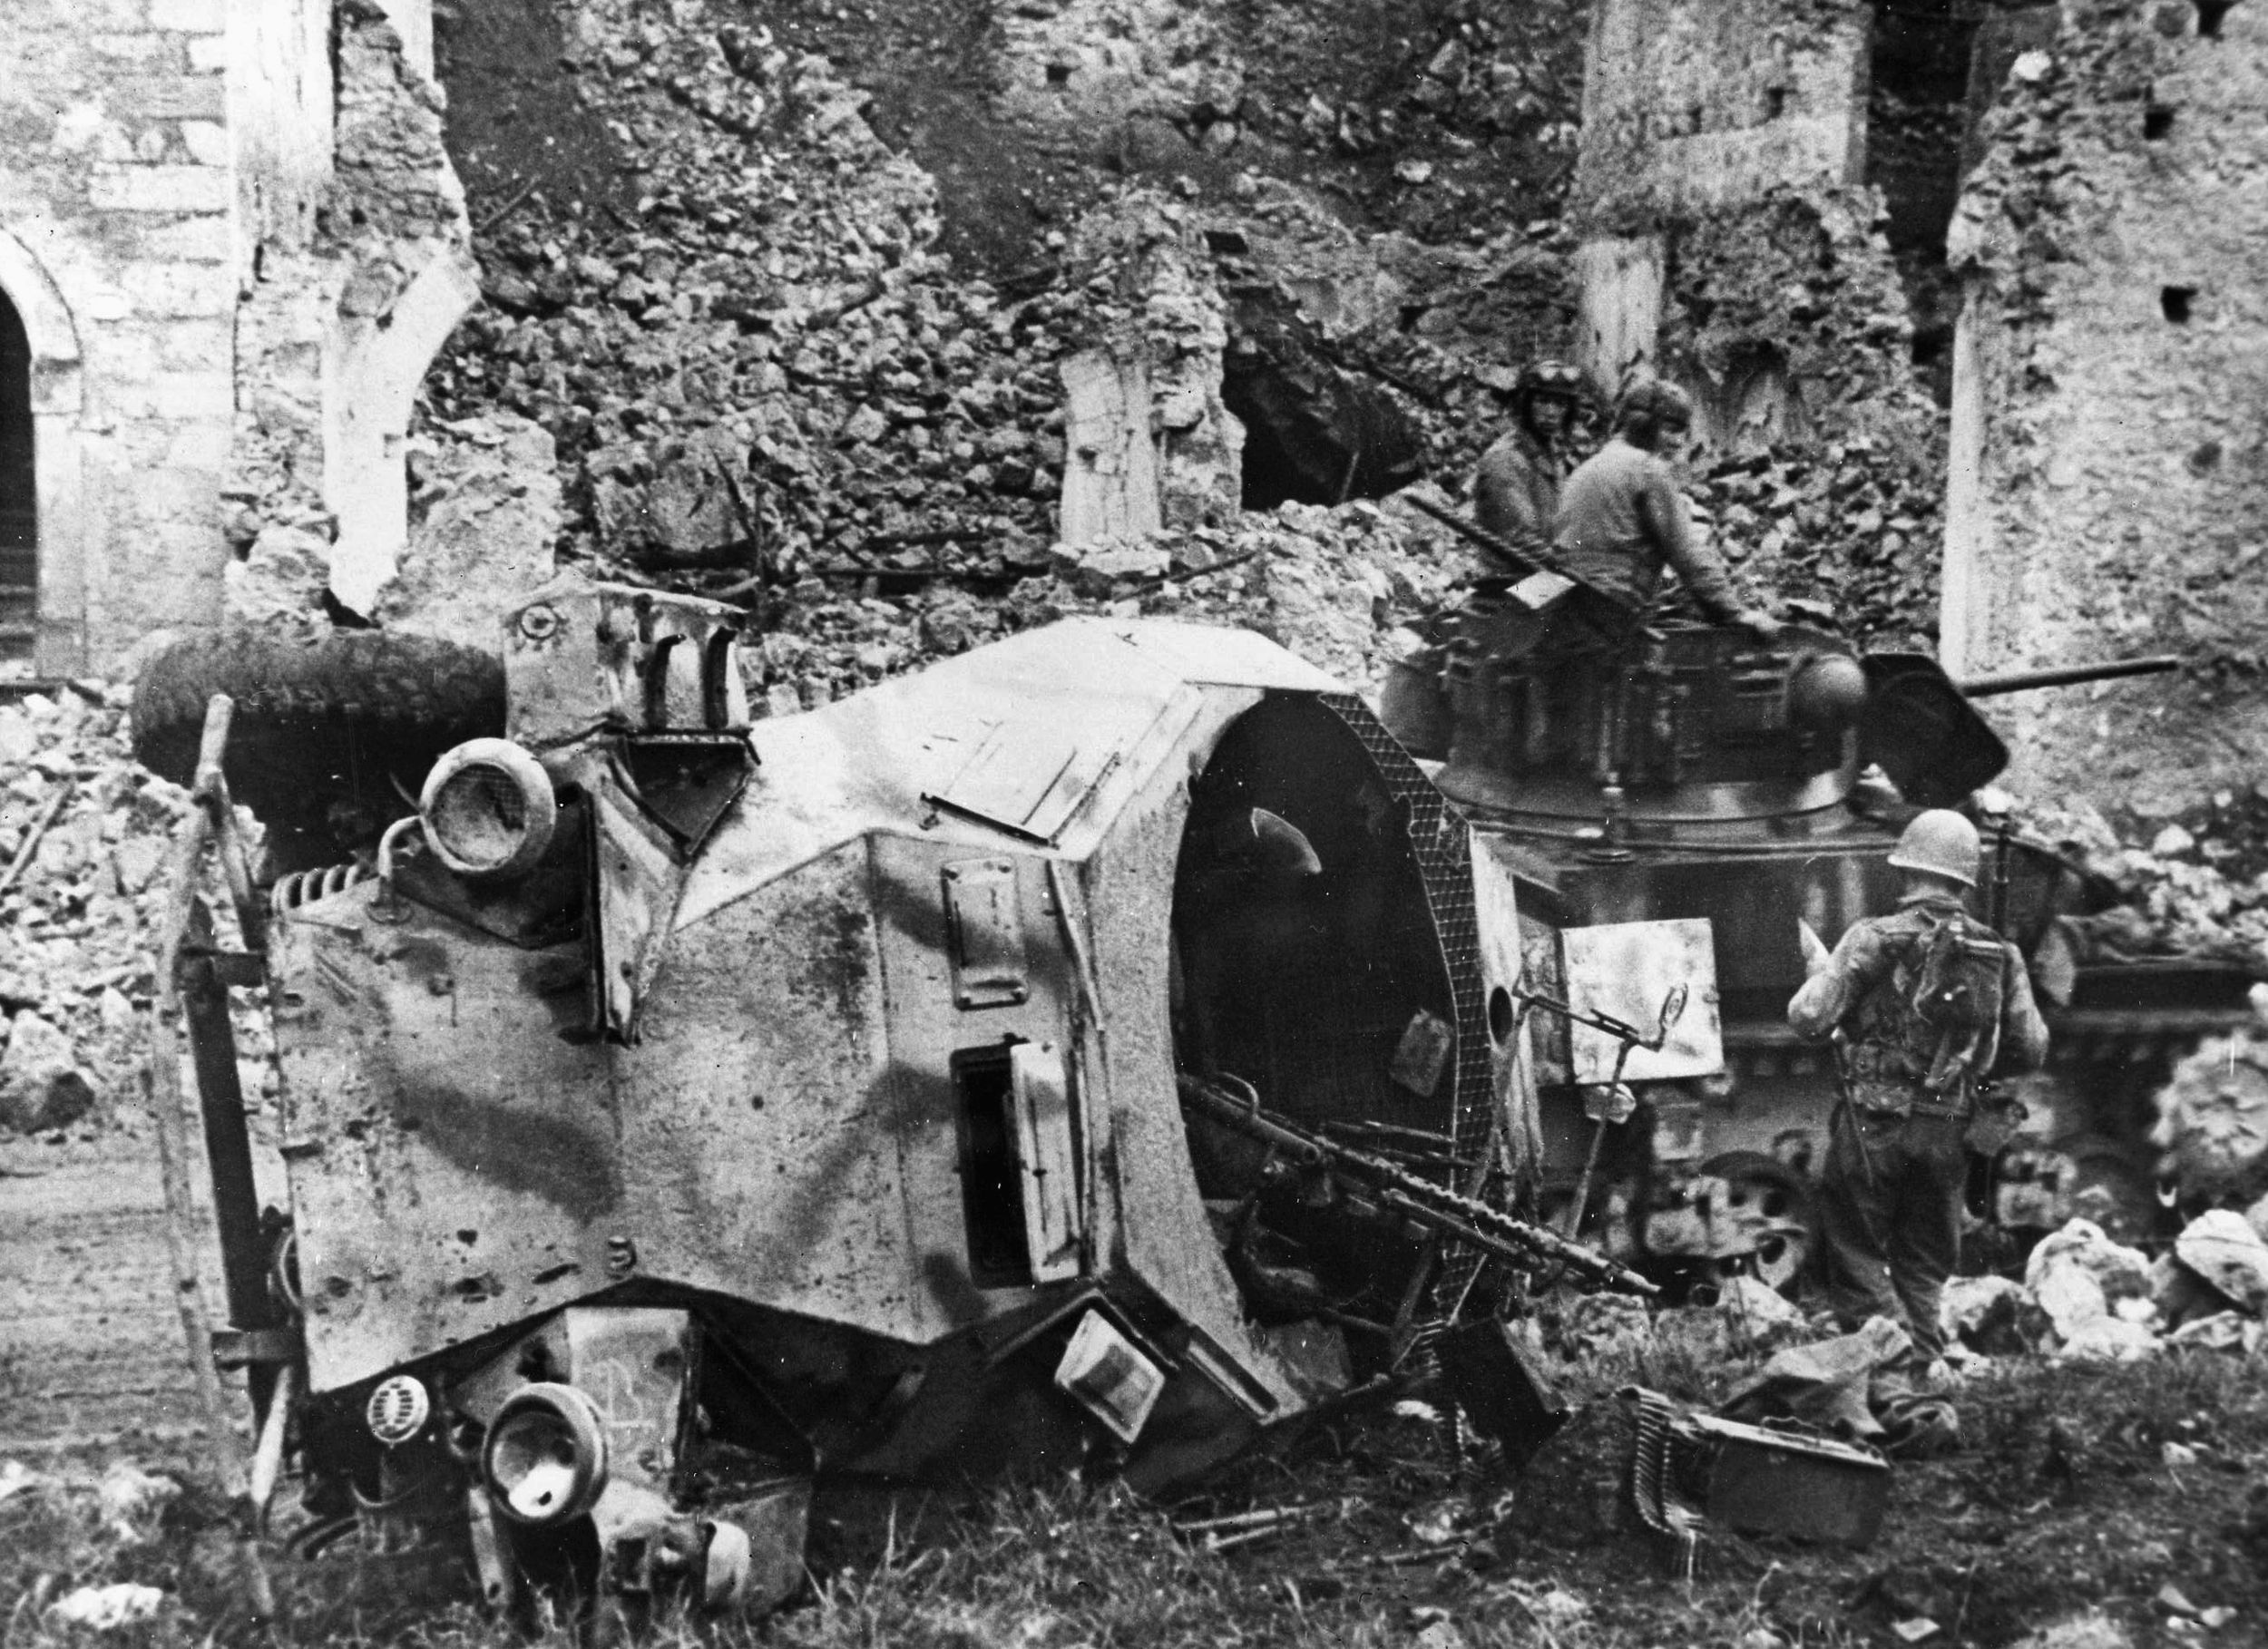 An American tank crew looks over a knocked-out German armored vehicle near Itri, Italy, in May 1944.